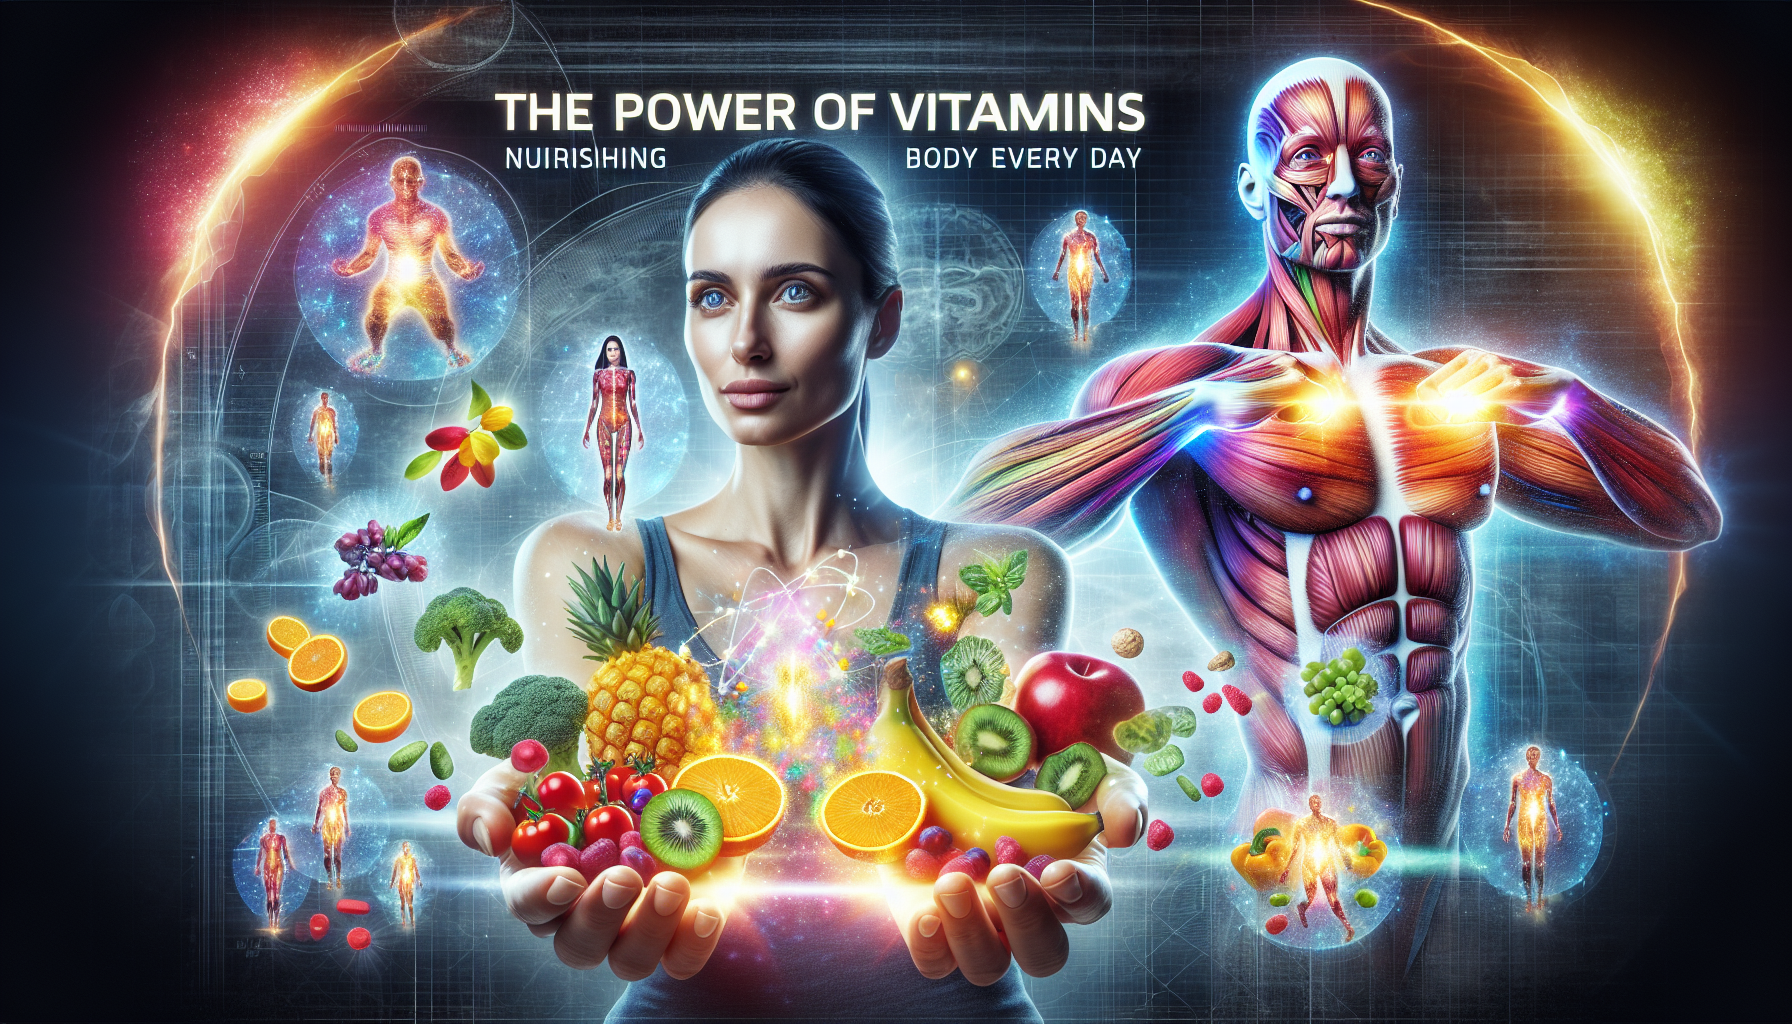 The Power of Vitamins: Nourishing your Body Every Day